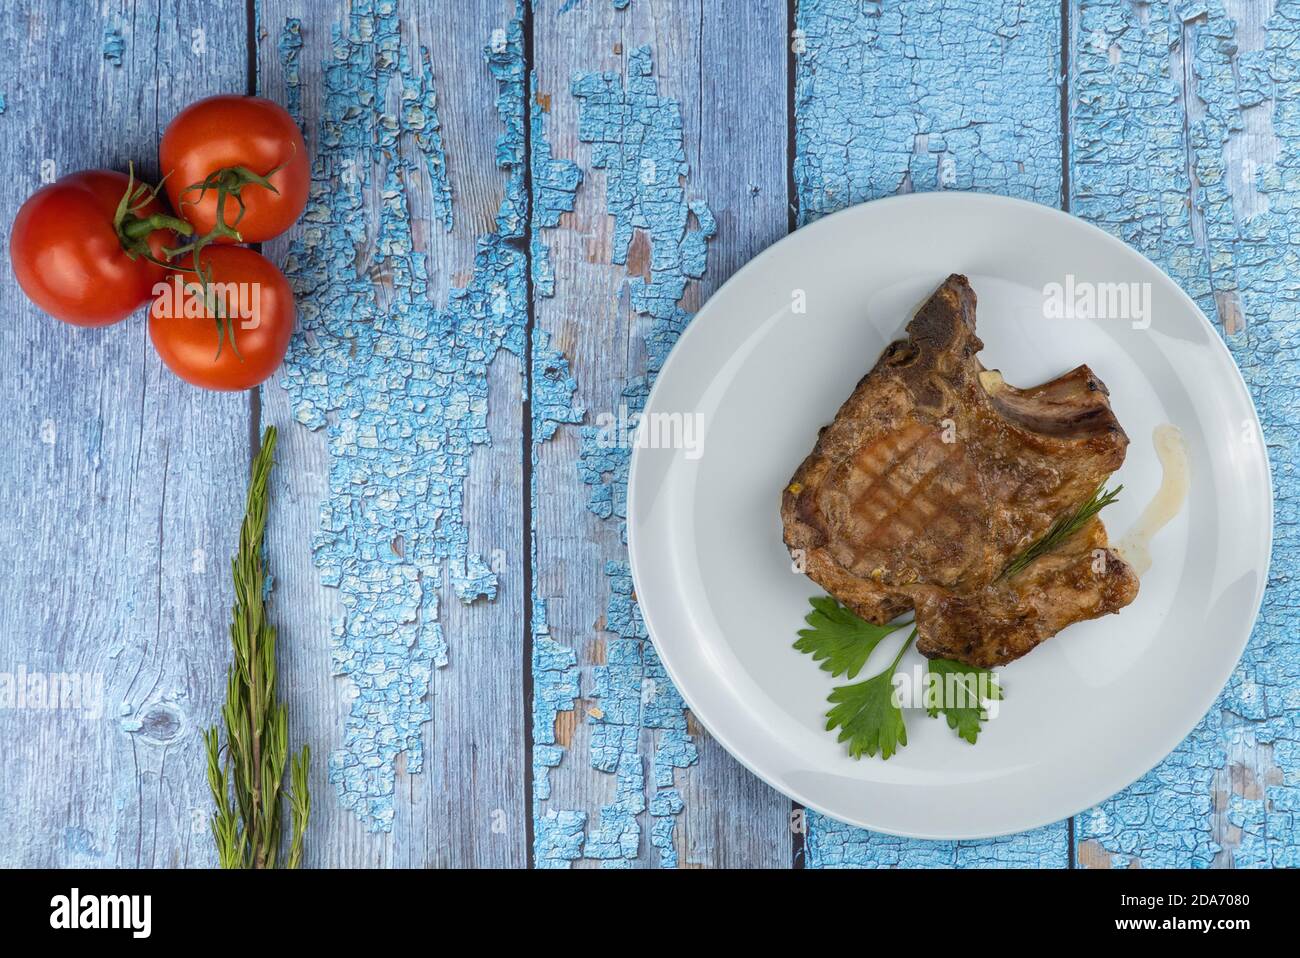 piece of delicious pork. fried steak in a plate on a wooden background. piece of deep-fried meat with tomatoes and a sprig of rosemary.  Stock Photo